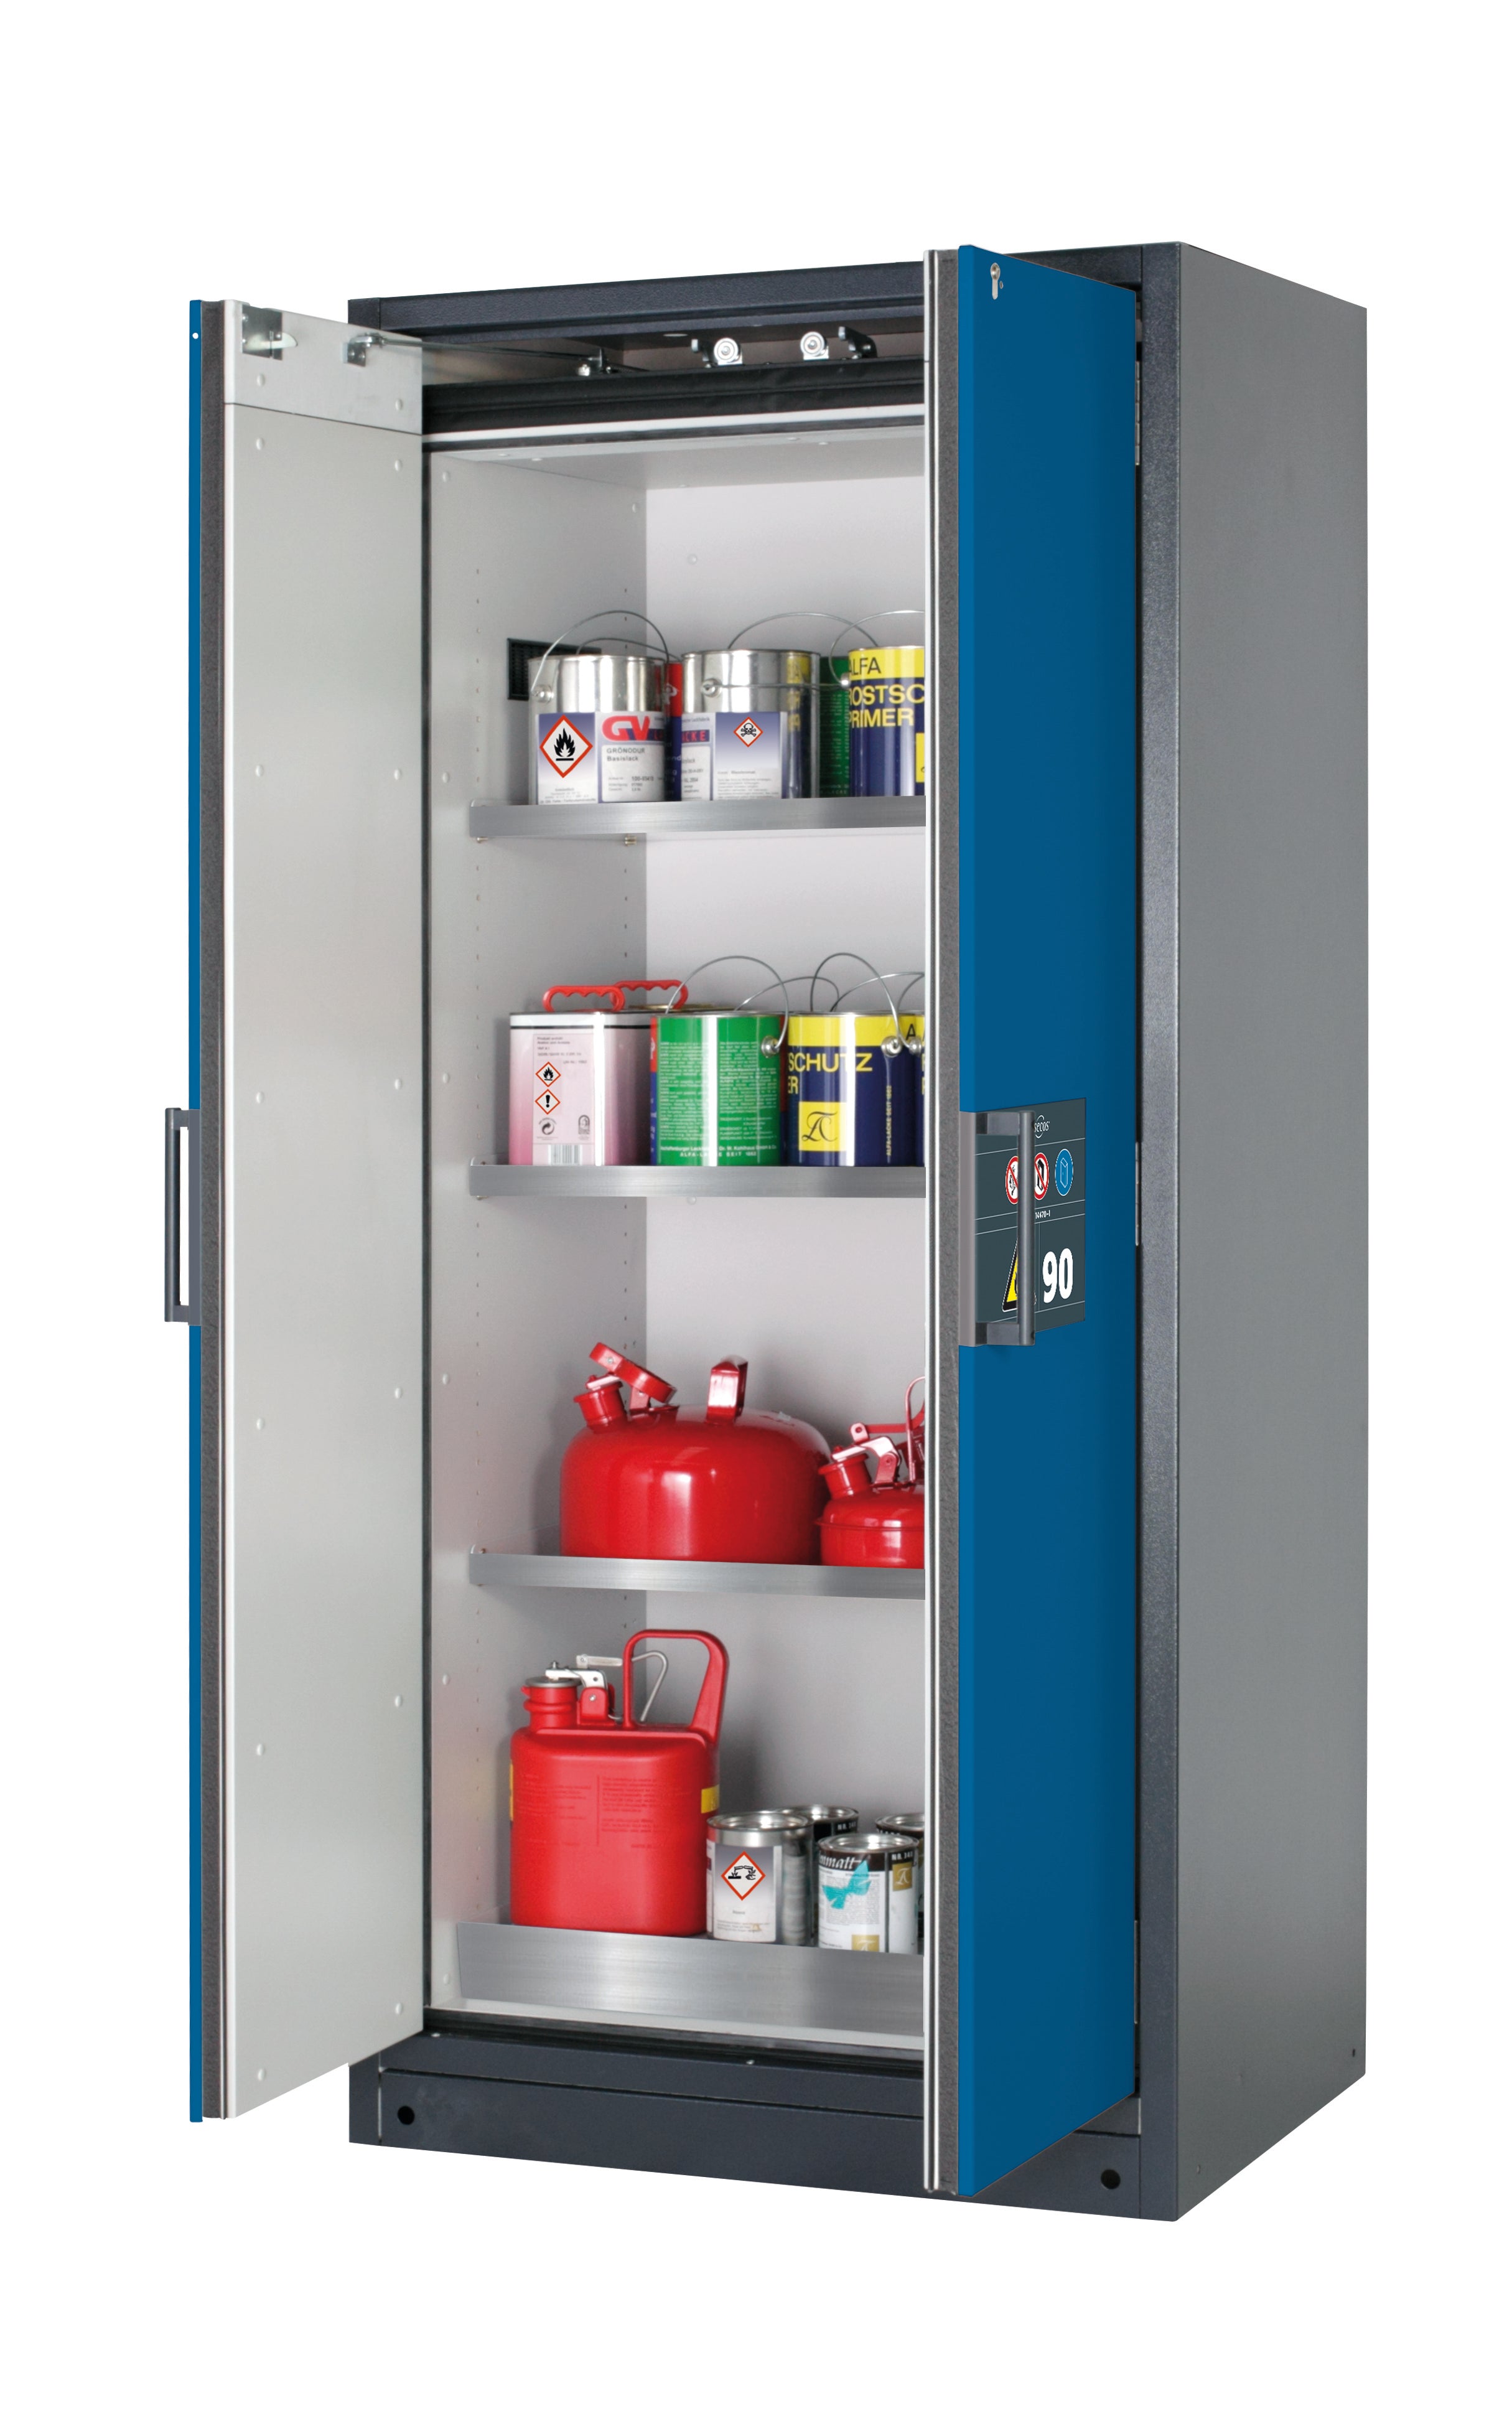 Type 90 safety storage cabinet Q-CLASSIC-90 model Q90.195.090 in gentian blue RAL 5010 with 3x shelf standard (stainless steel 1.4301),